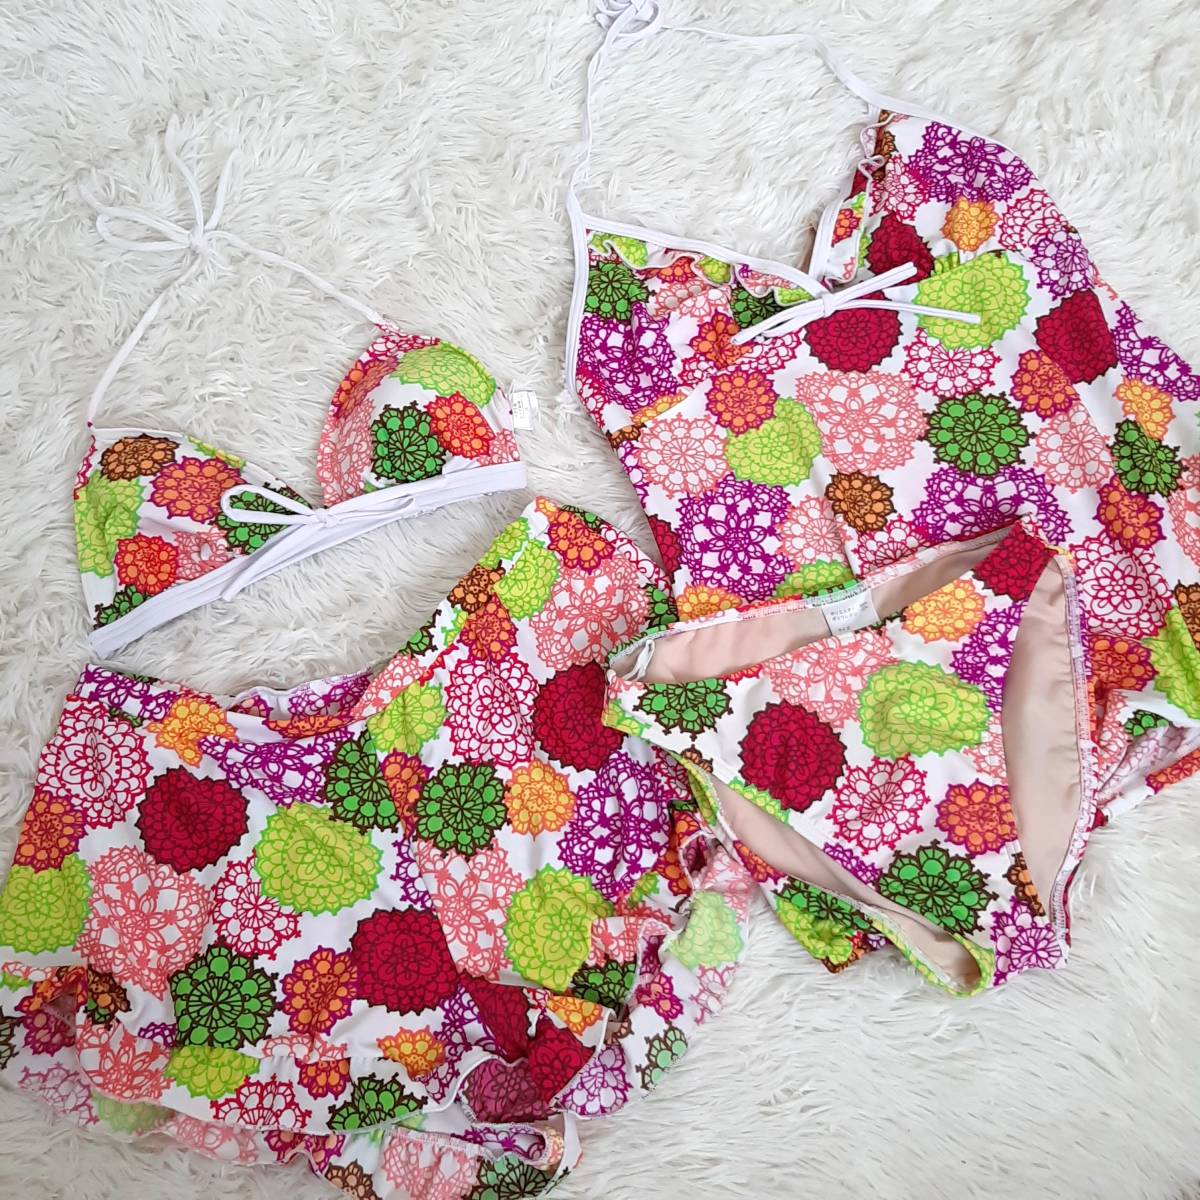  anonymity delivery *... floral print triangle bikini Rush Guard Cami short pants swimsuit 4 point set 11L X